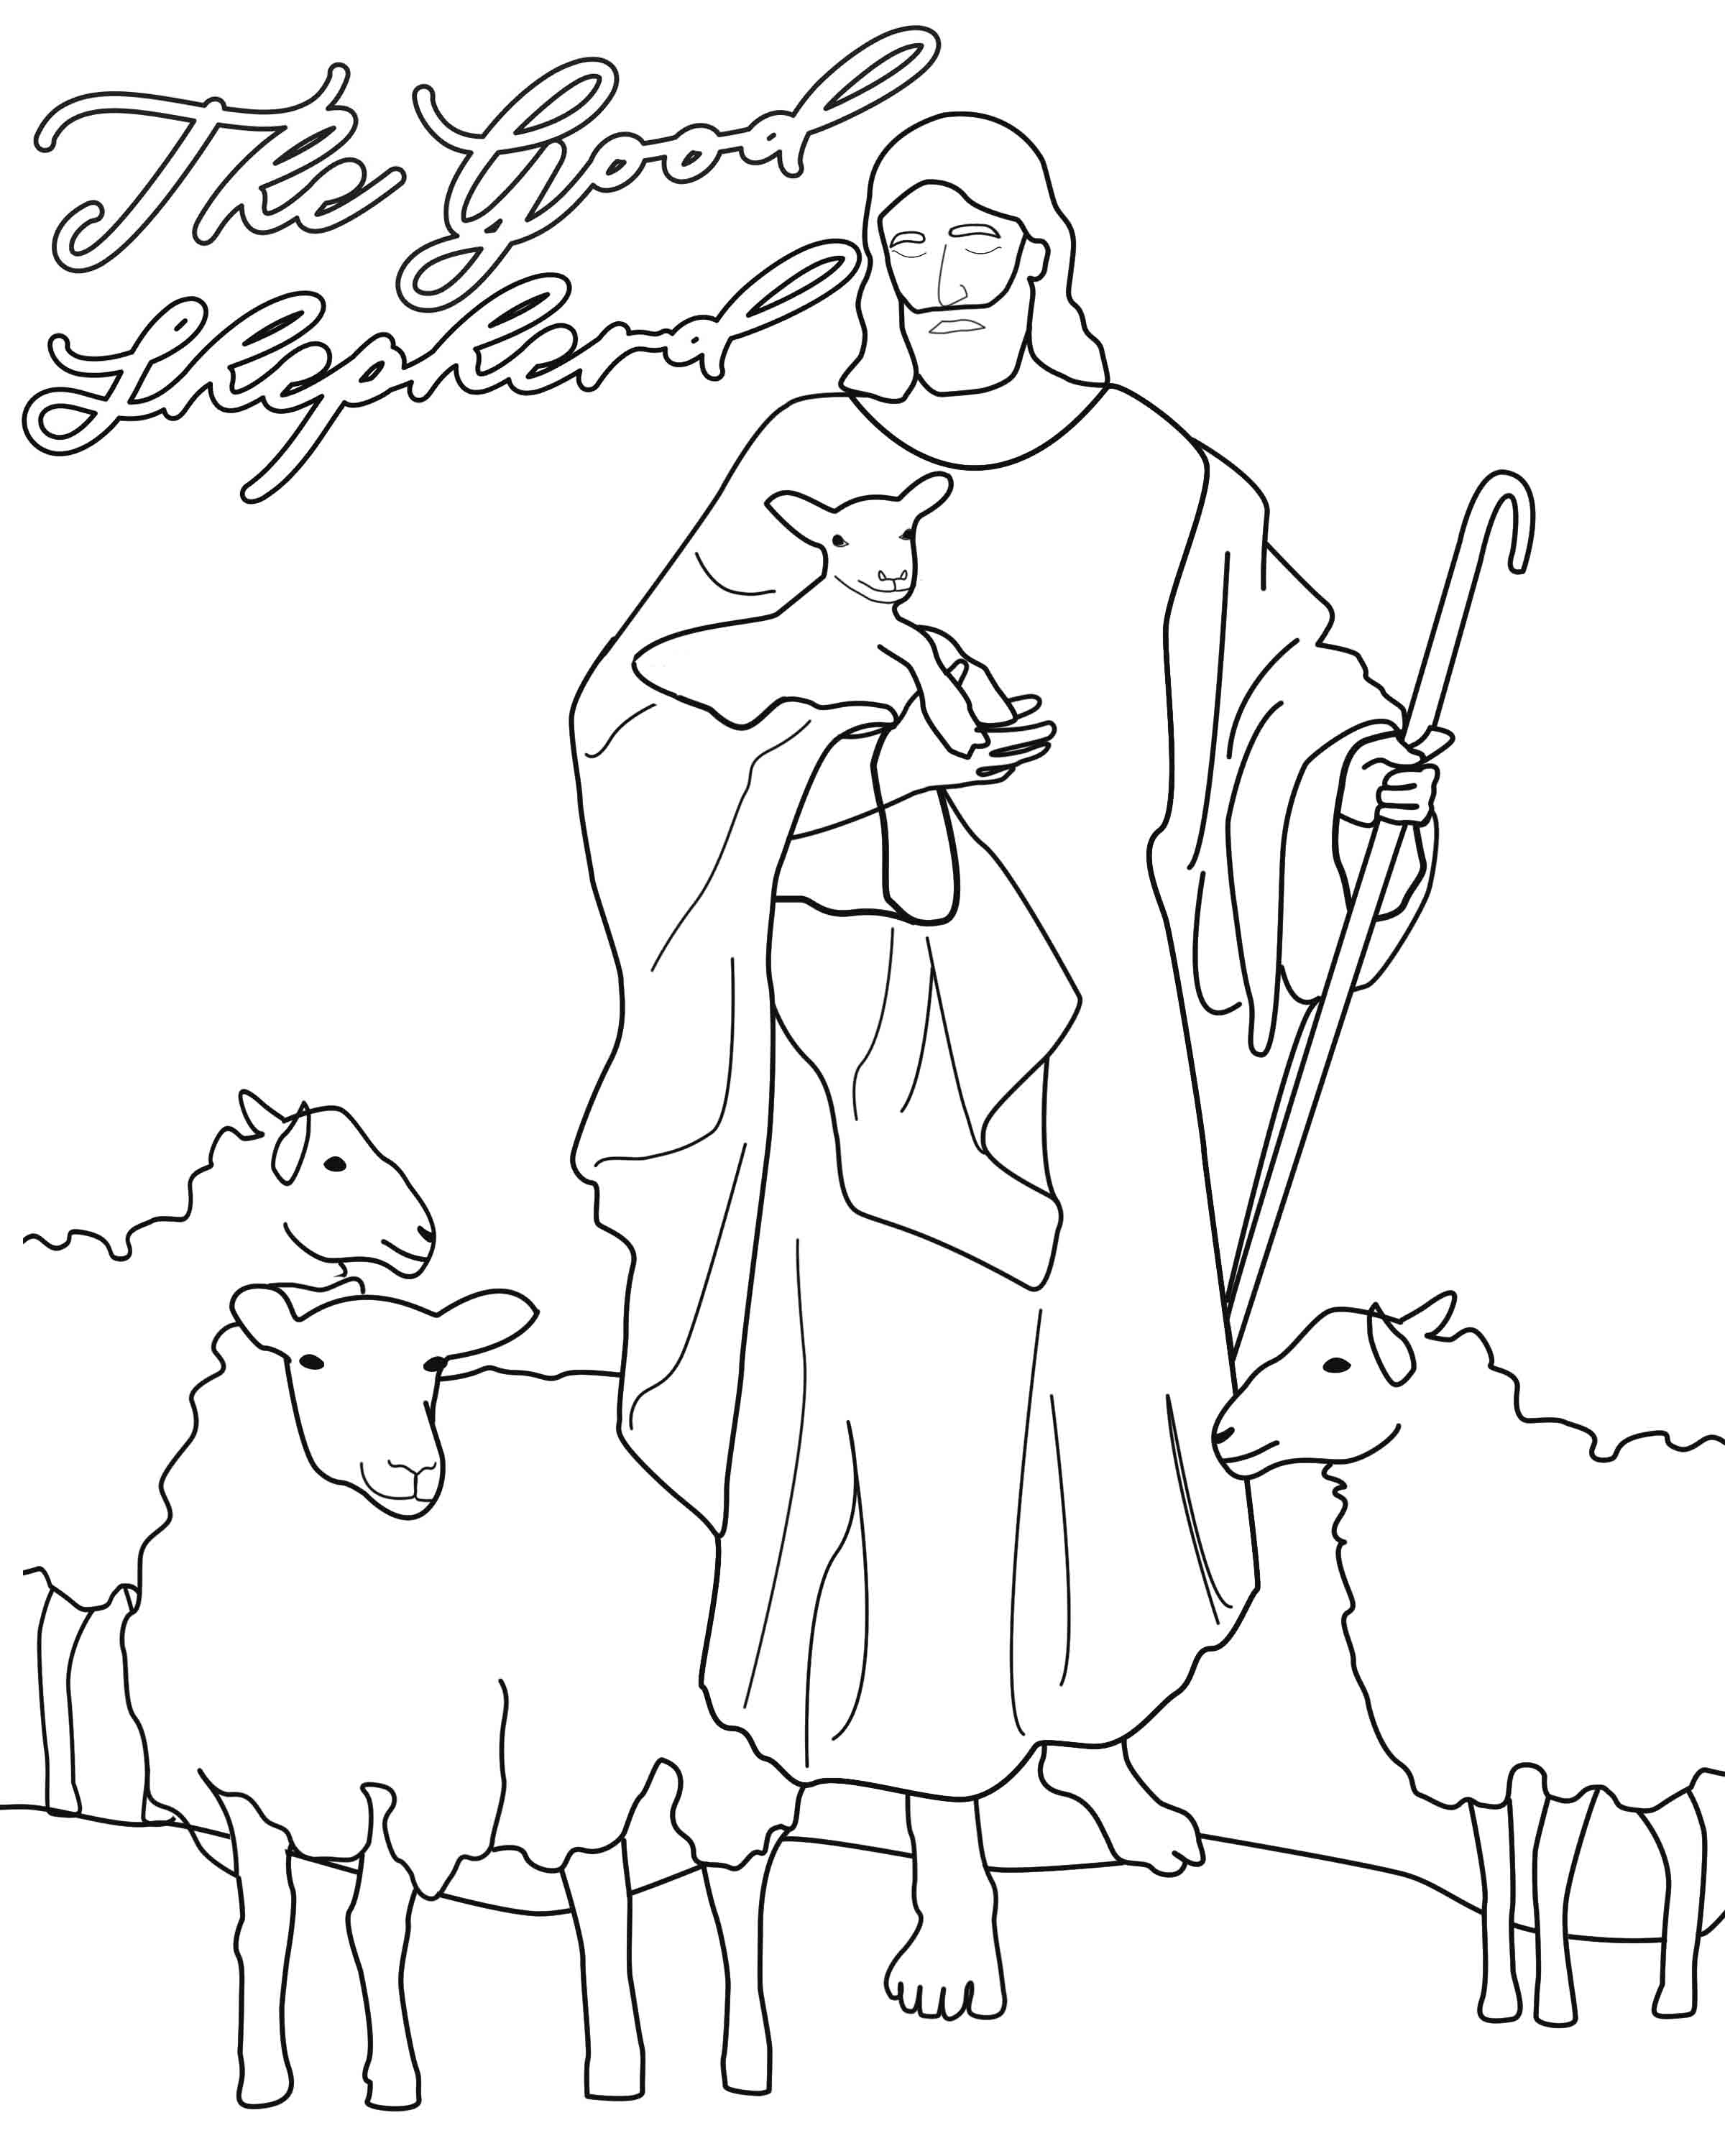 The Good Shepherd Coloring Page The Good Shepherd Story Come Follow Me April 29 May 5th John 7 10